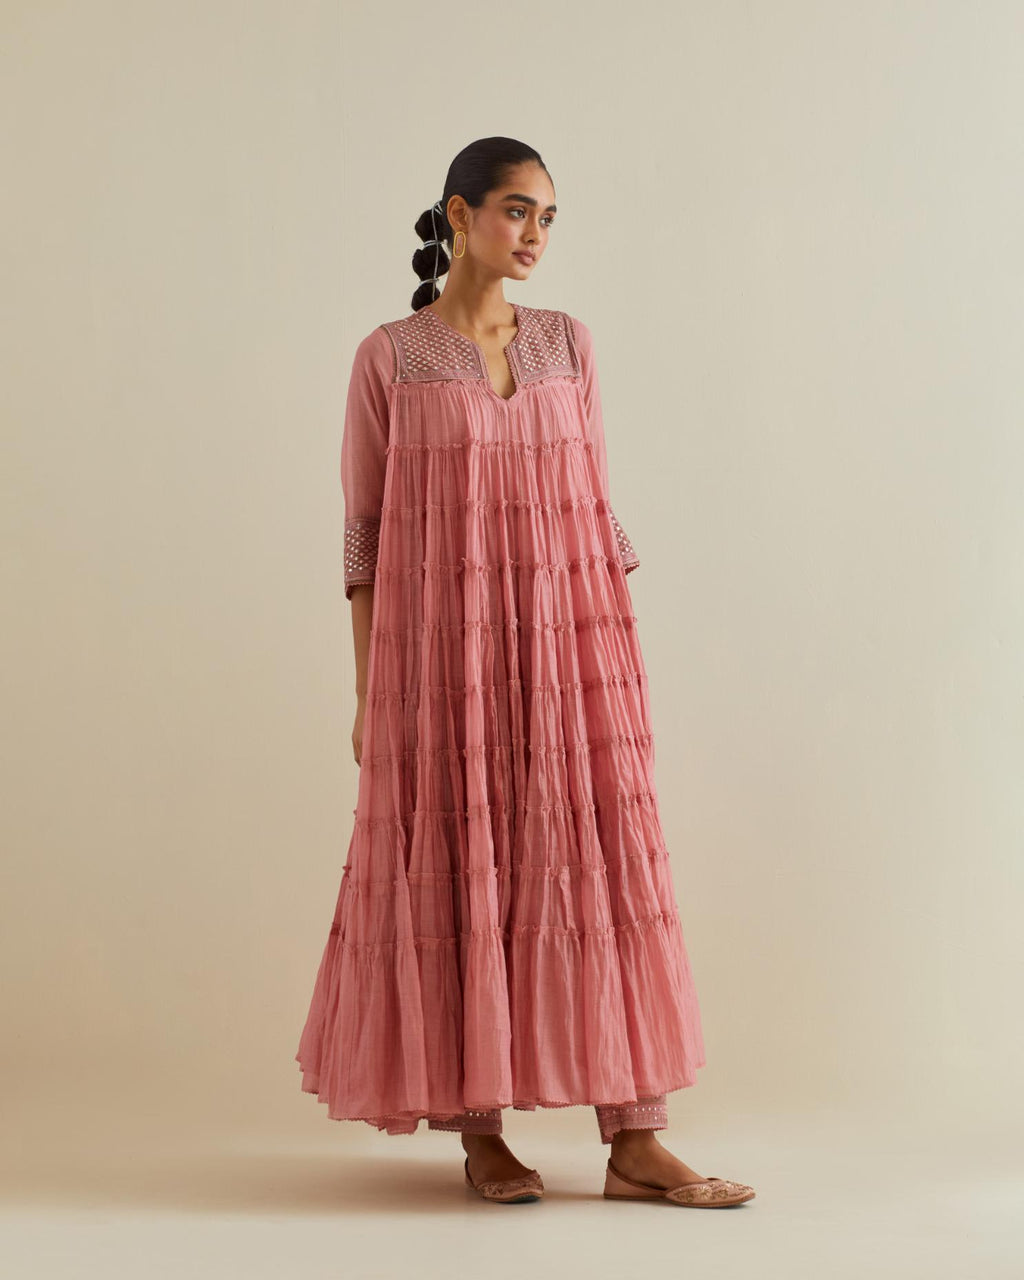 Pink cotton chanderi multi-tiered kurta dress set with 3/4 sleeves, highlighted with mirror work.